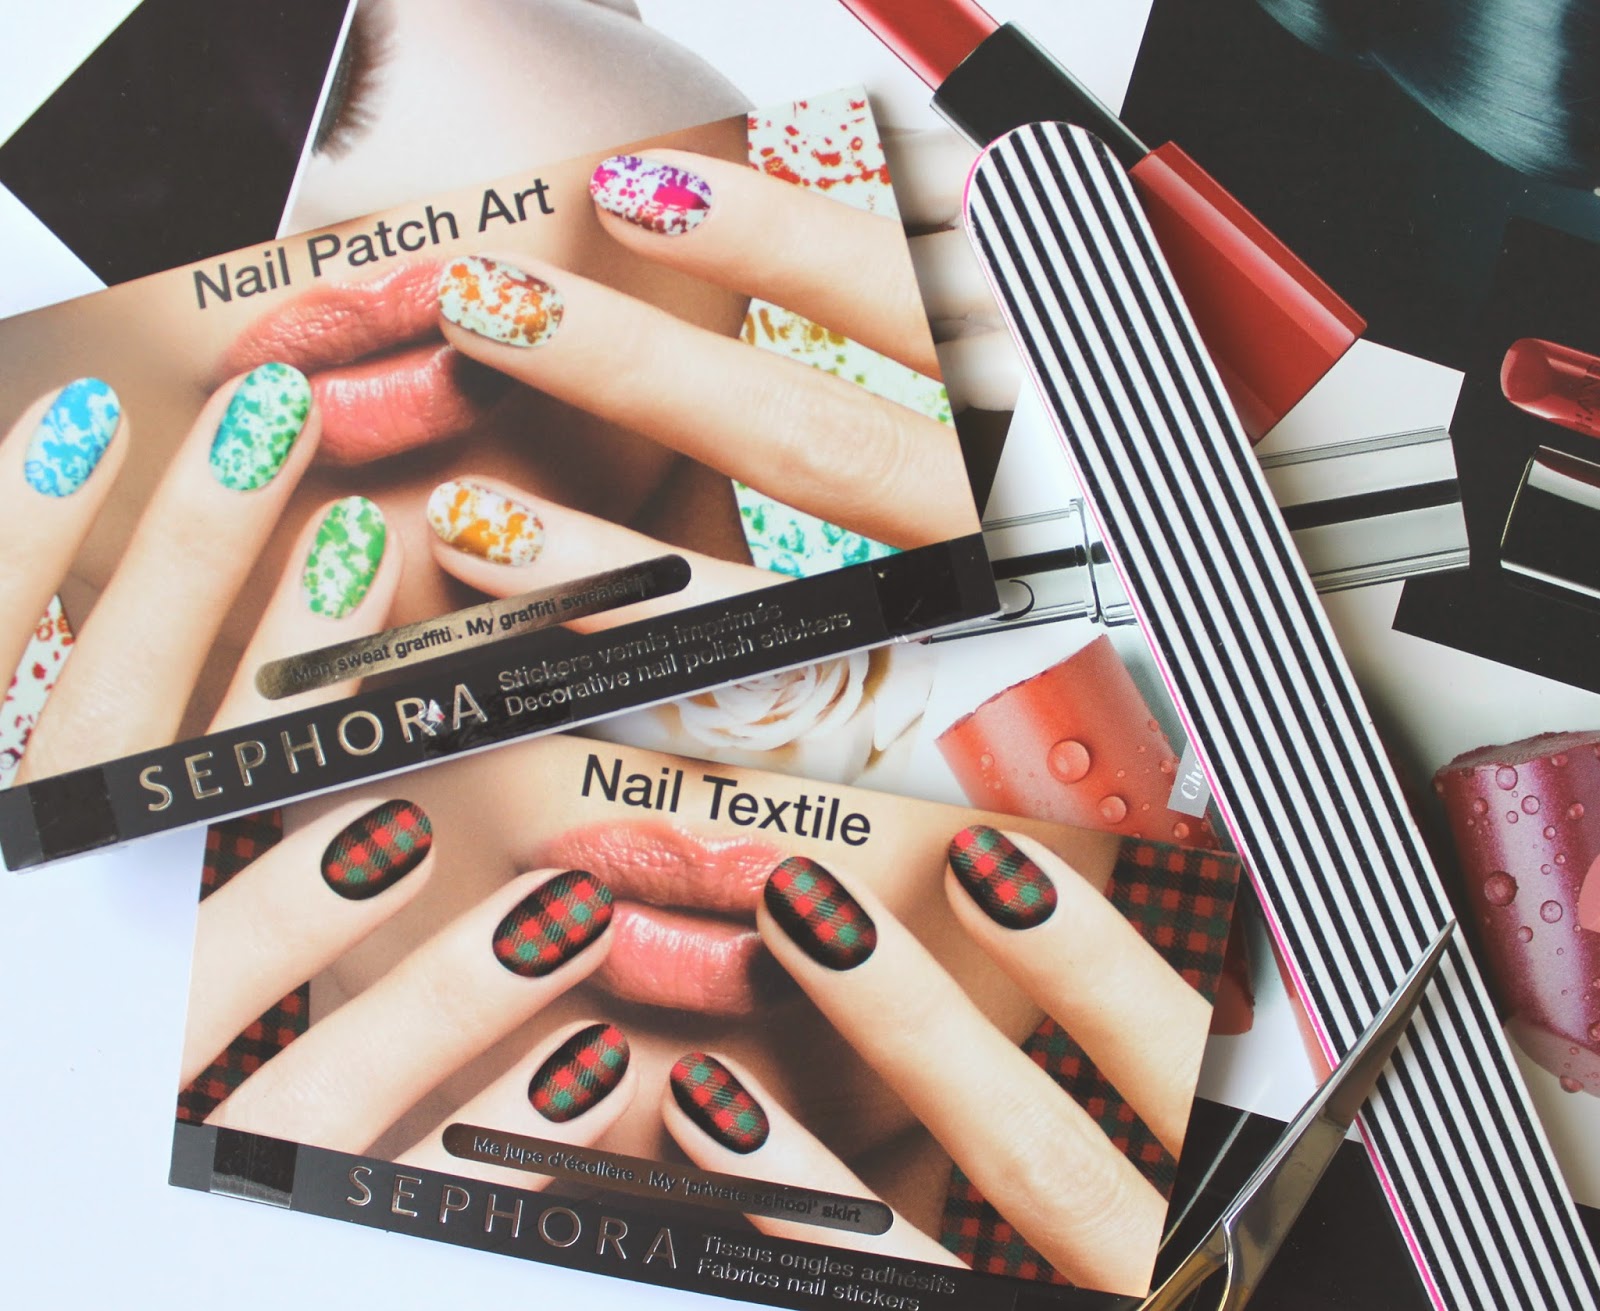 7. Nail Art Line Stickers - Sephora - wide 2